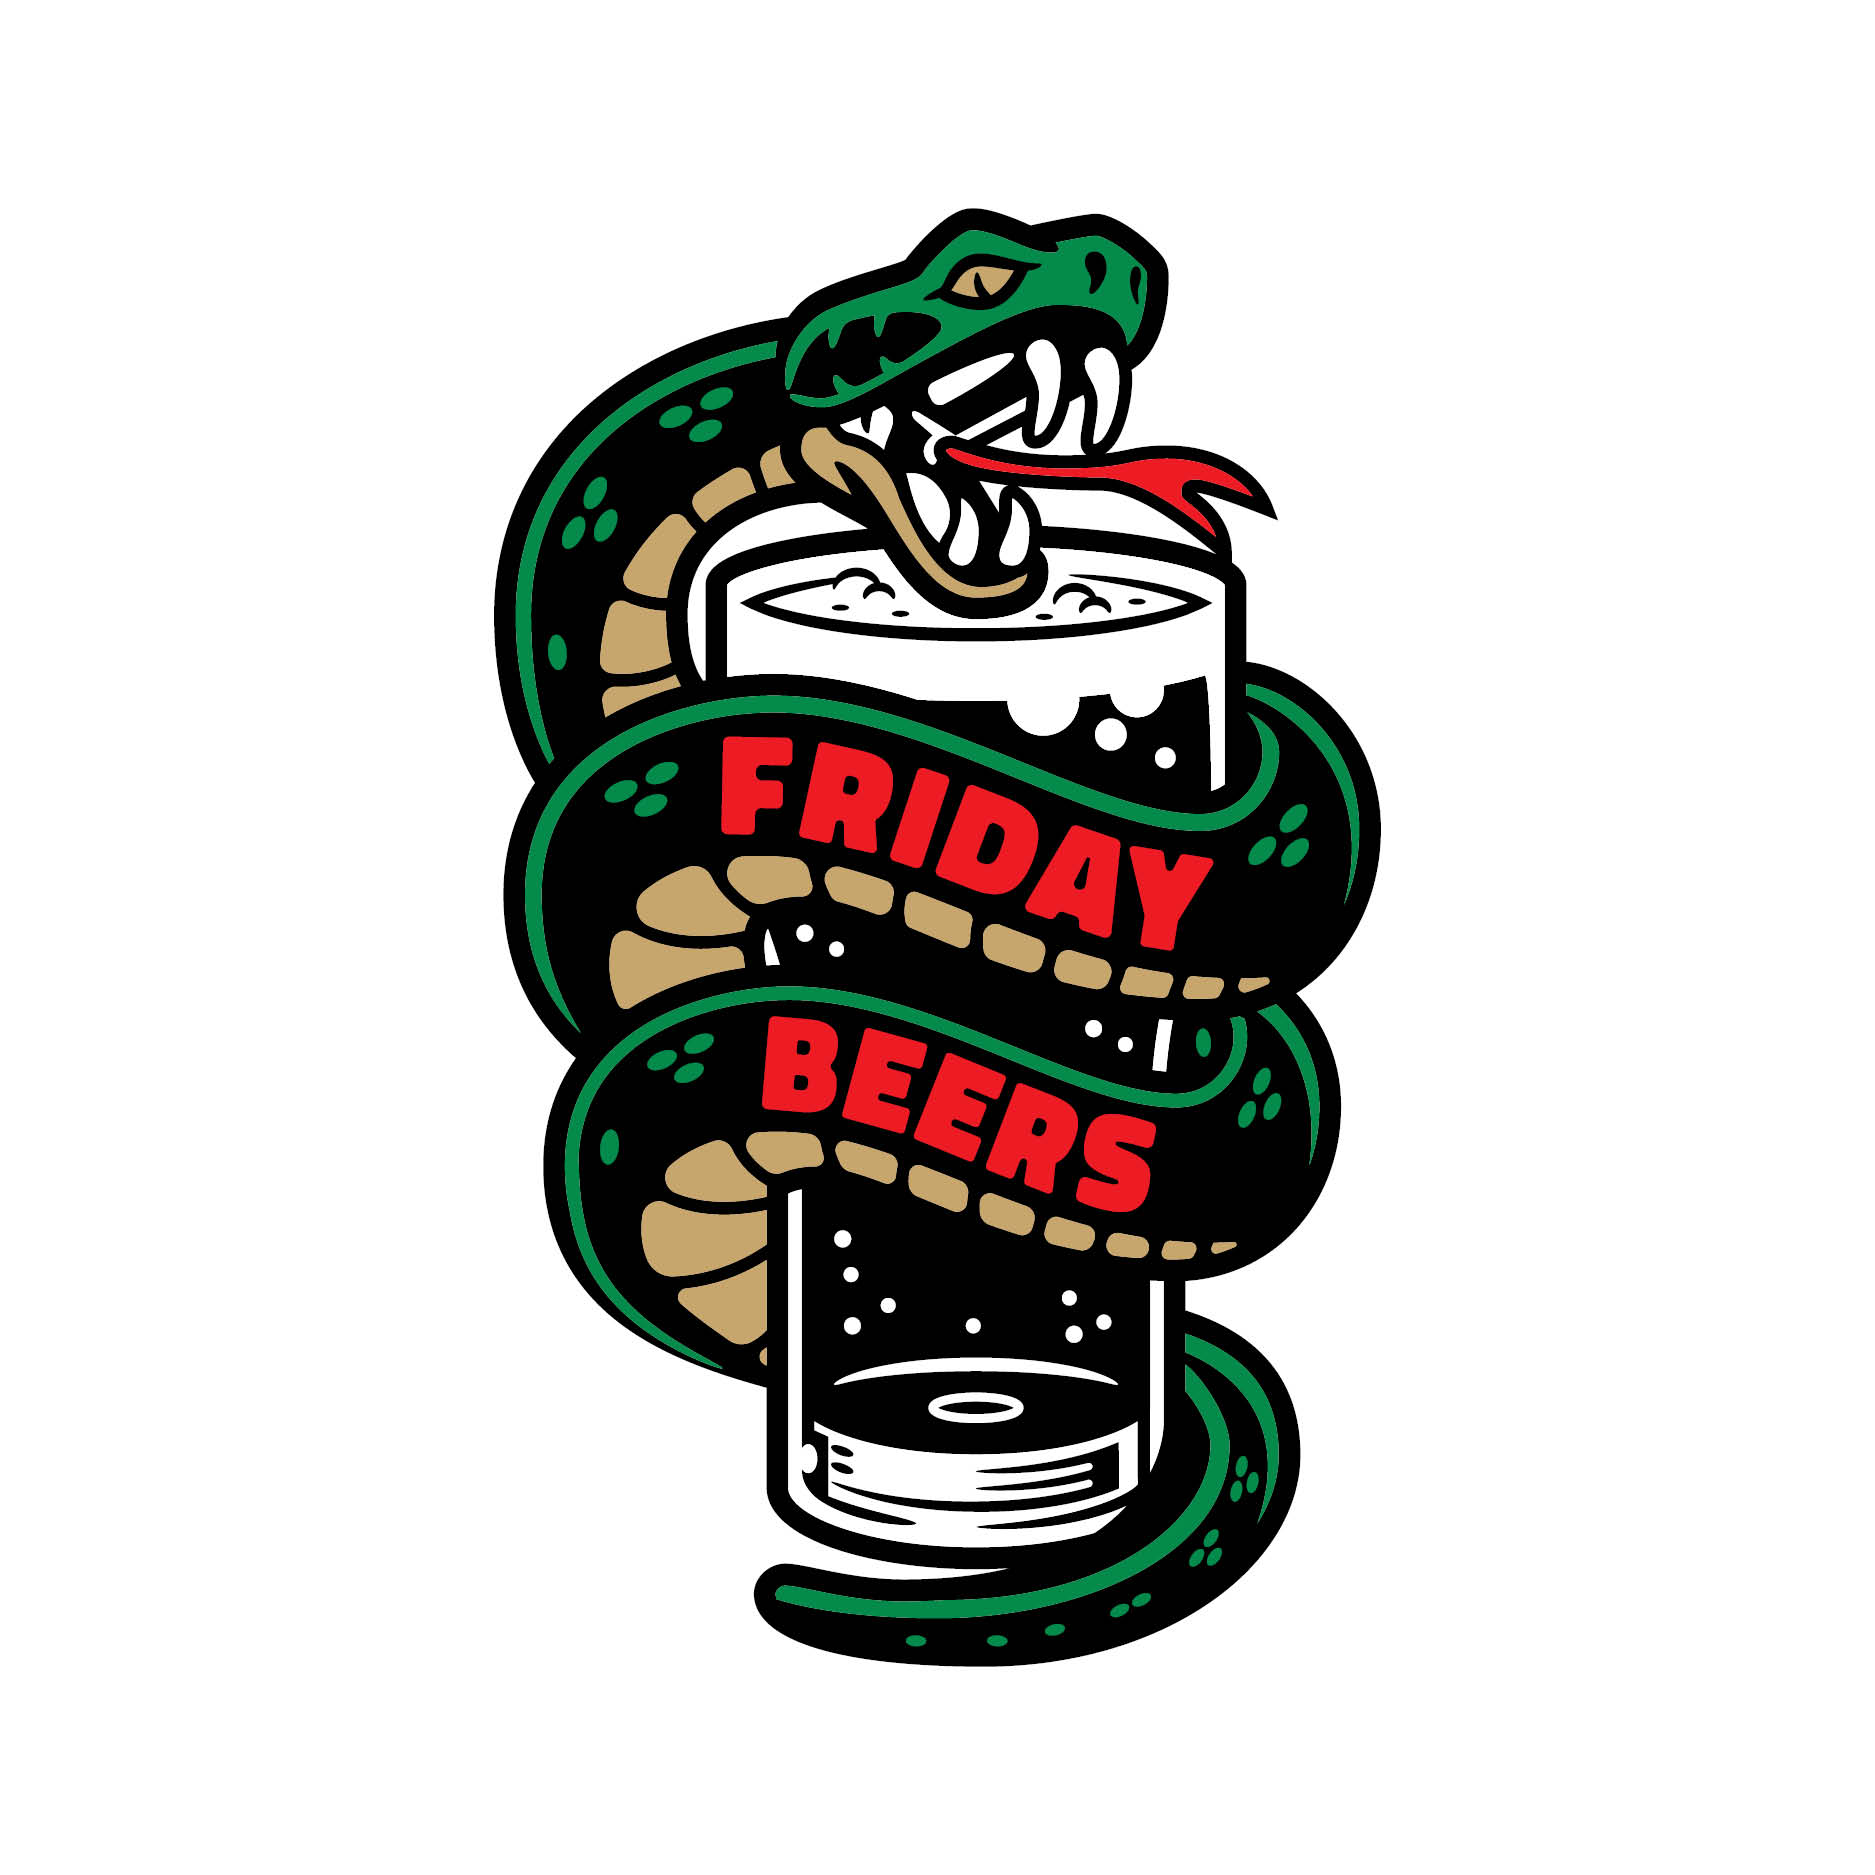 Friday Beers Snake logo design by logo designer Duffy Design Co for your inspiration and for the worlds largest logo competition